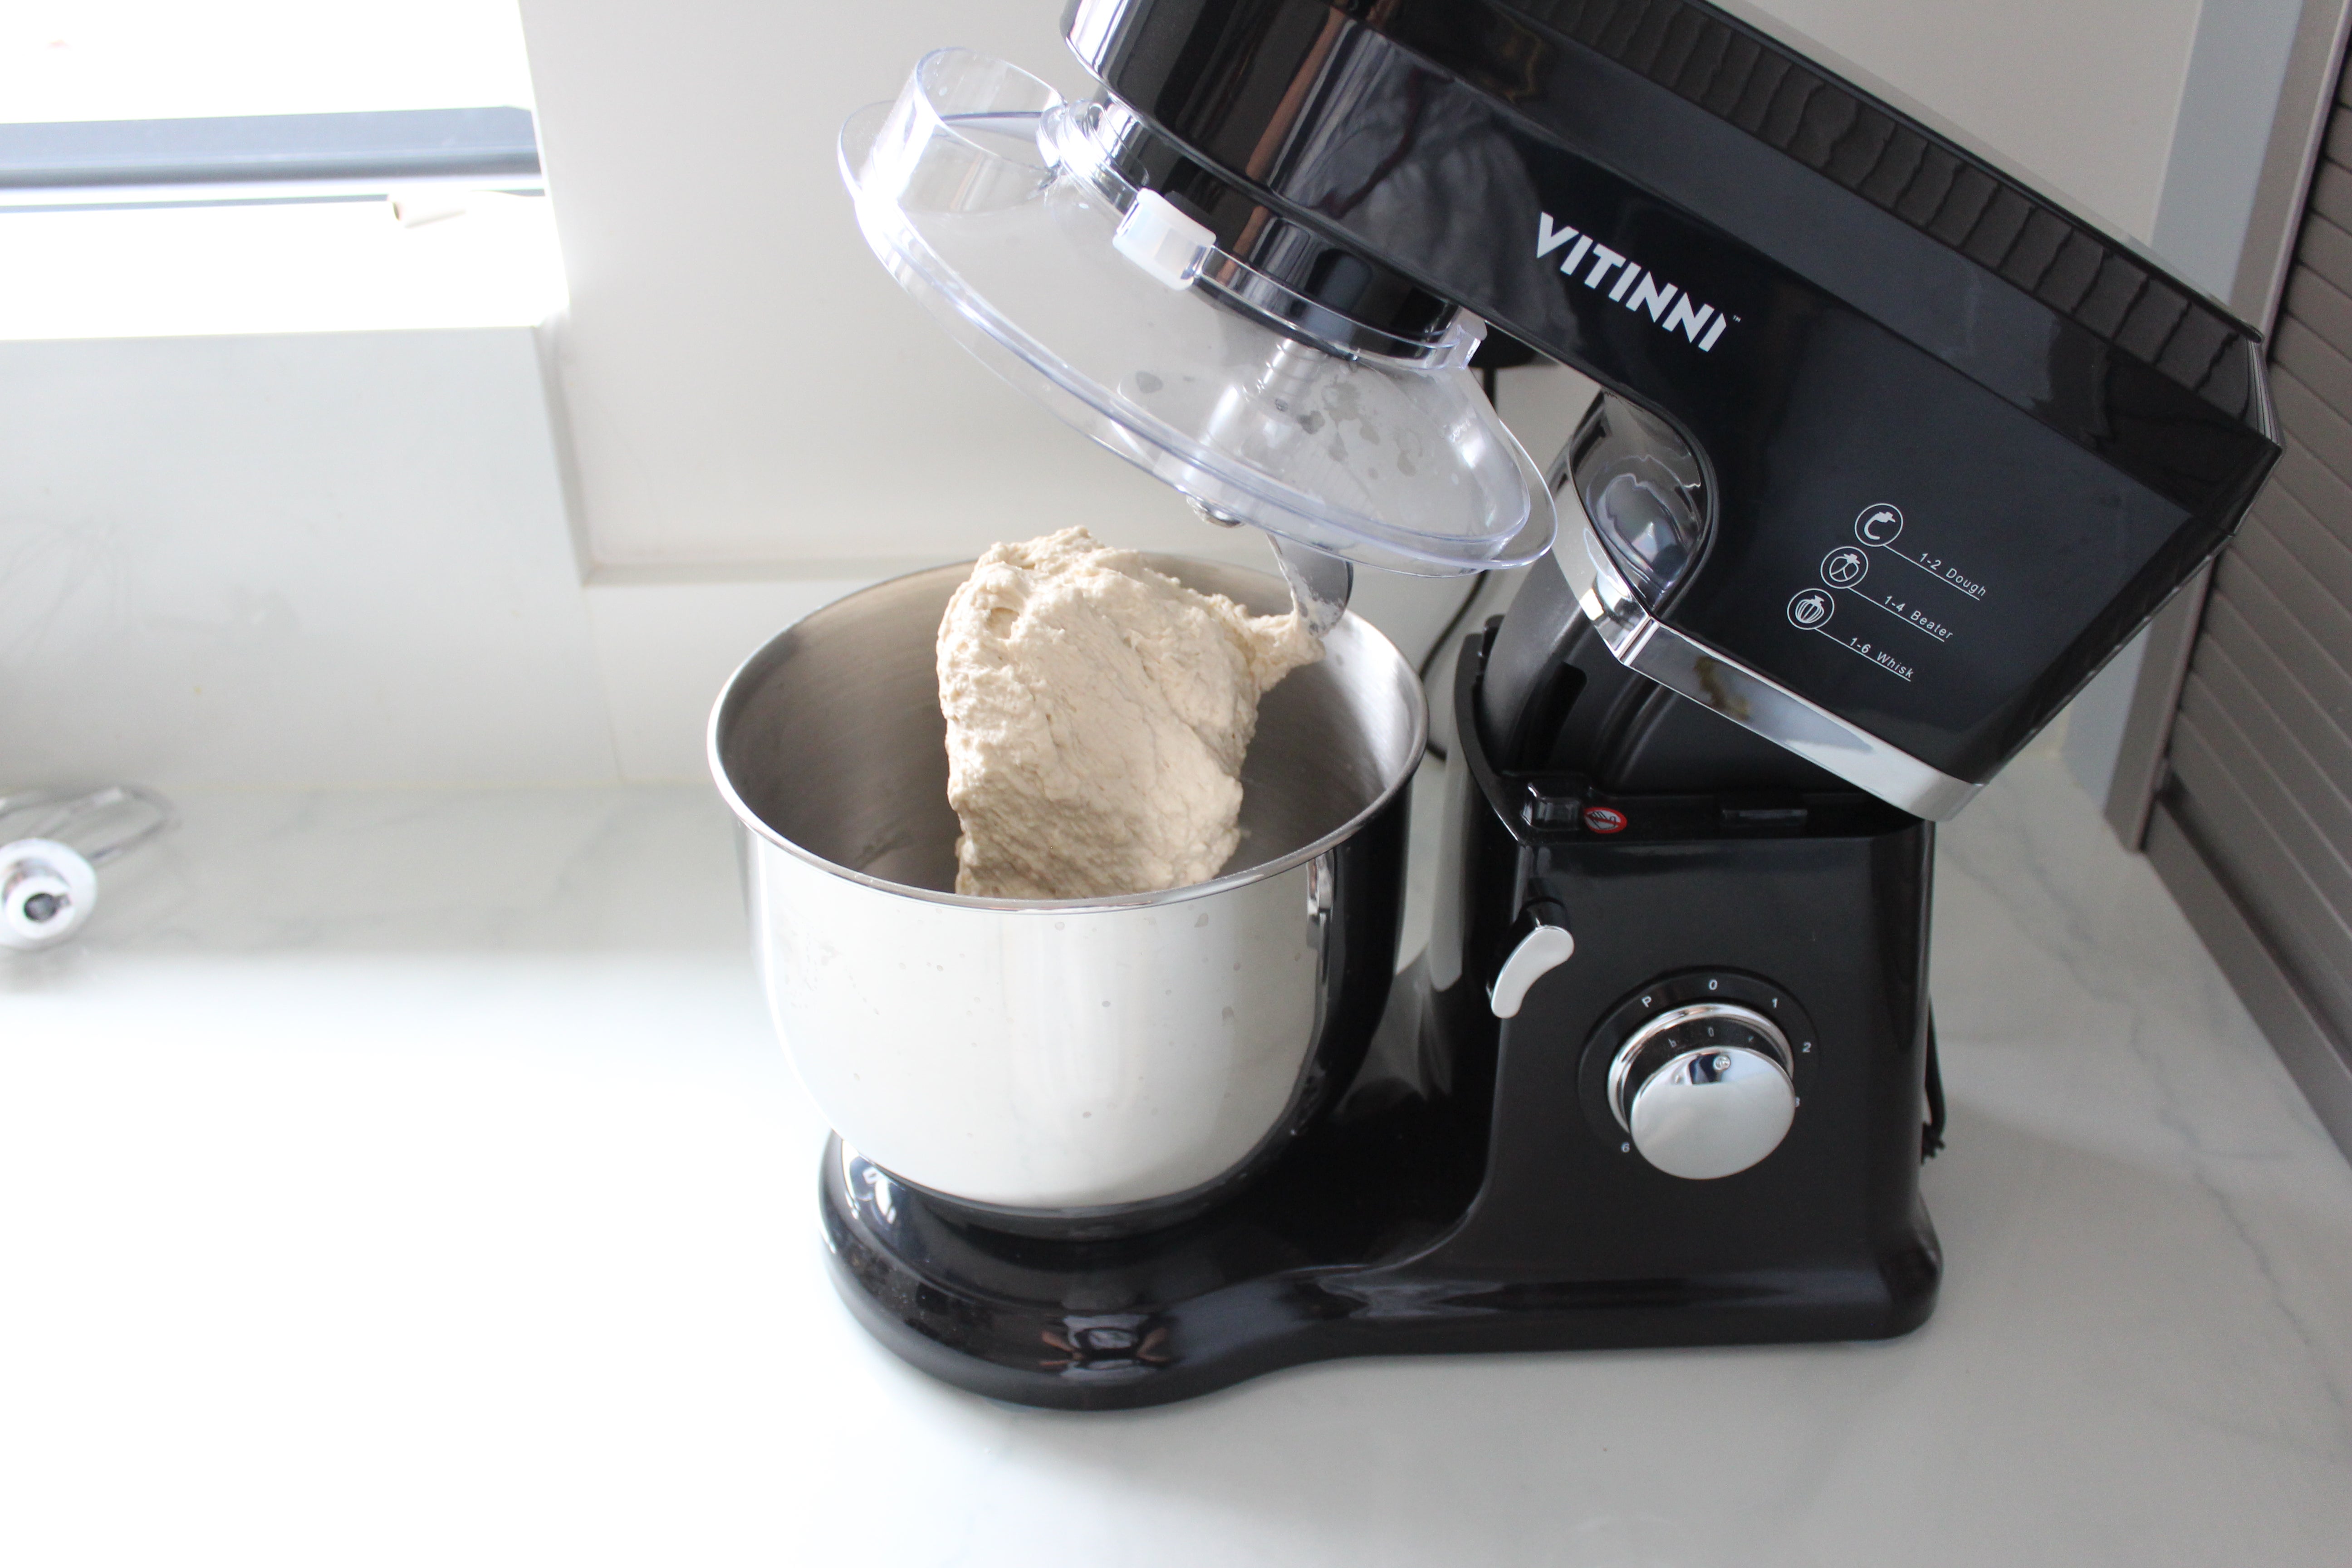 Vitinni 800W Stand Mixer in use with dough in bowl.